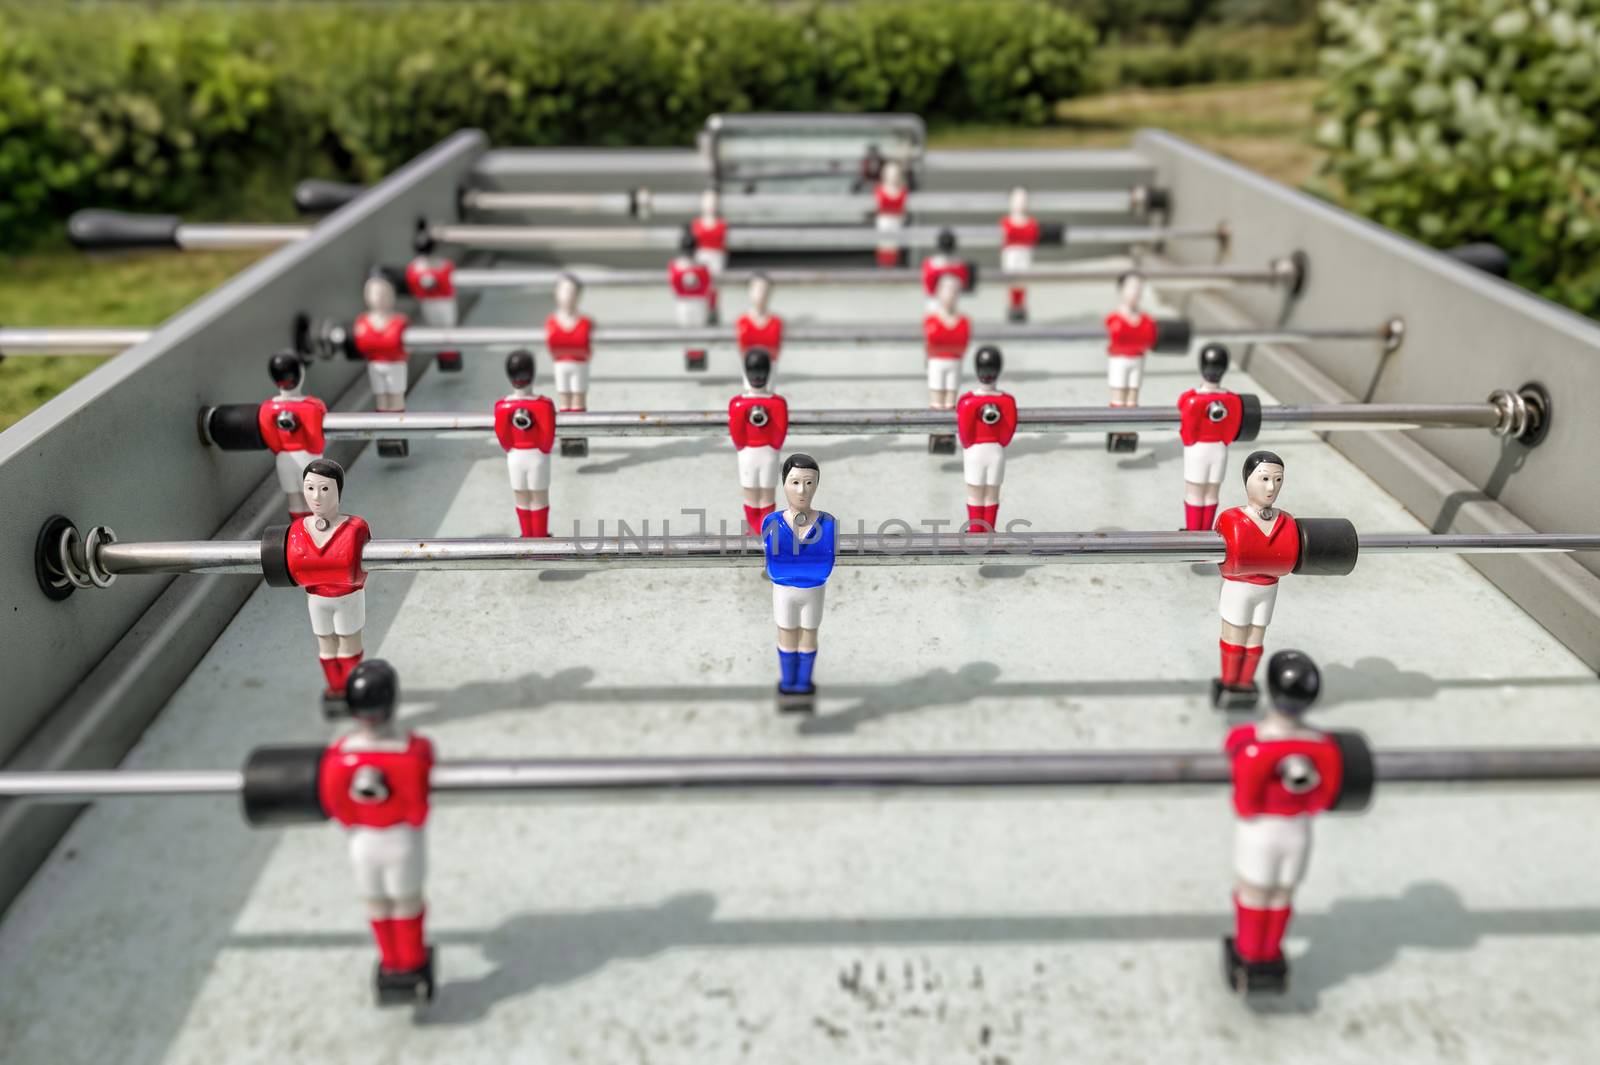 Outdoor table football showing only one blue player. Conceptual image for uniqueness and individuality.